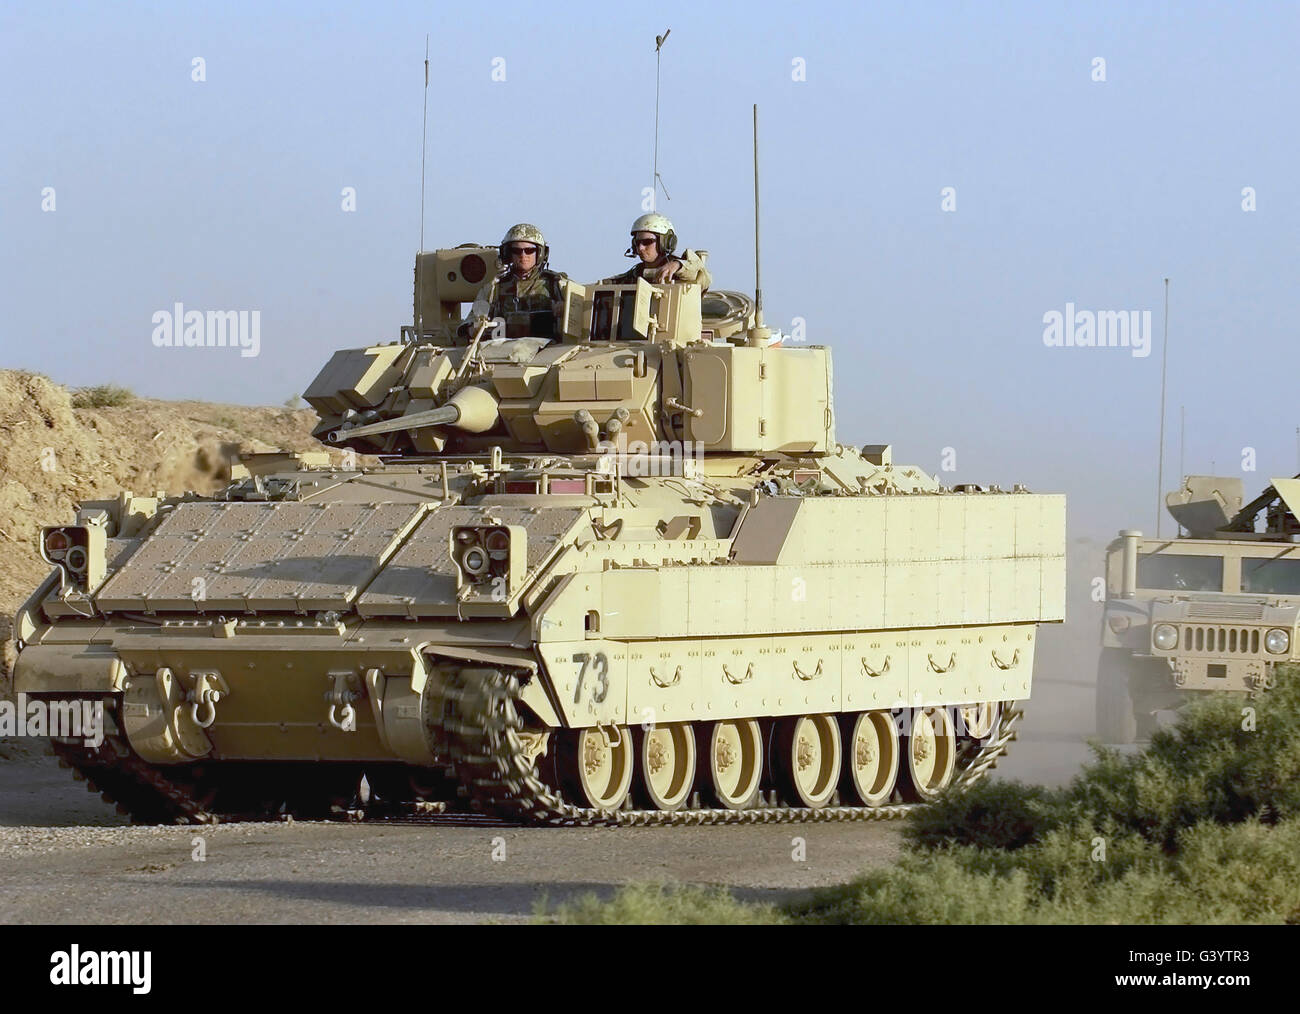 A convoy of Bradley and Humvee armored vehicles. Stock Photo